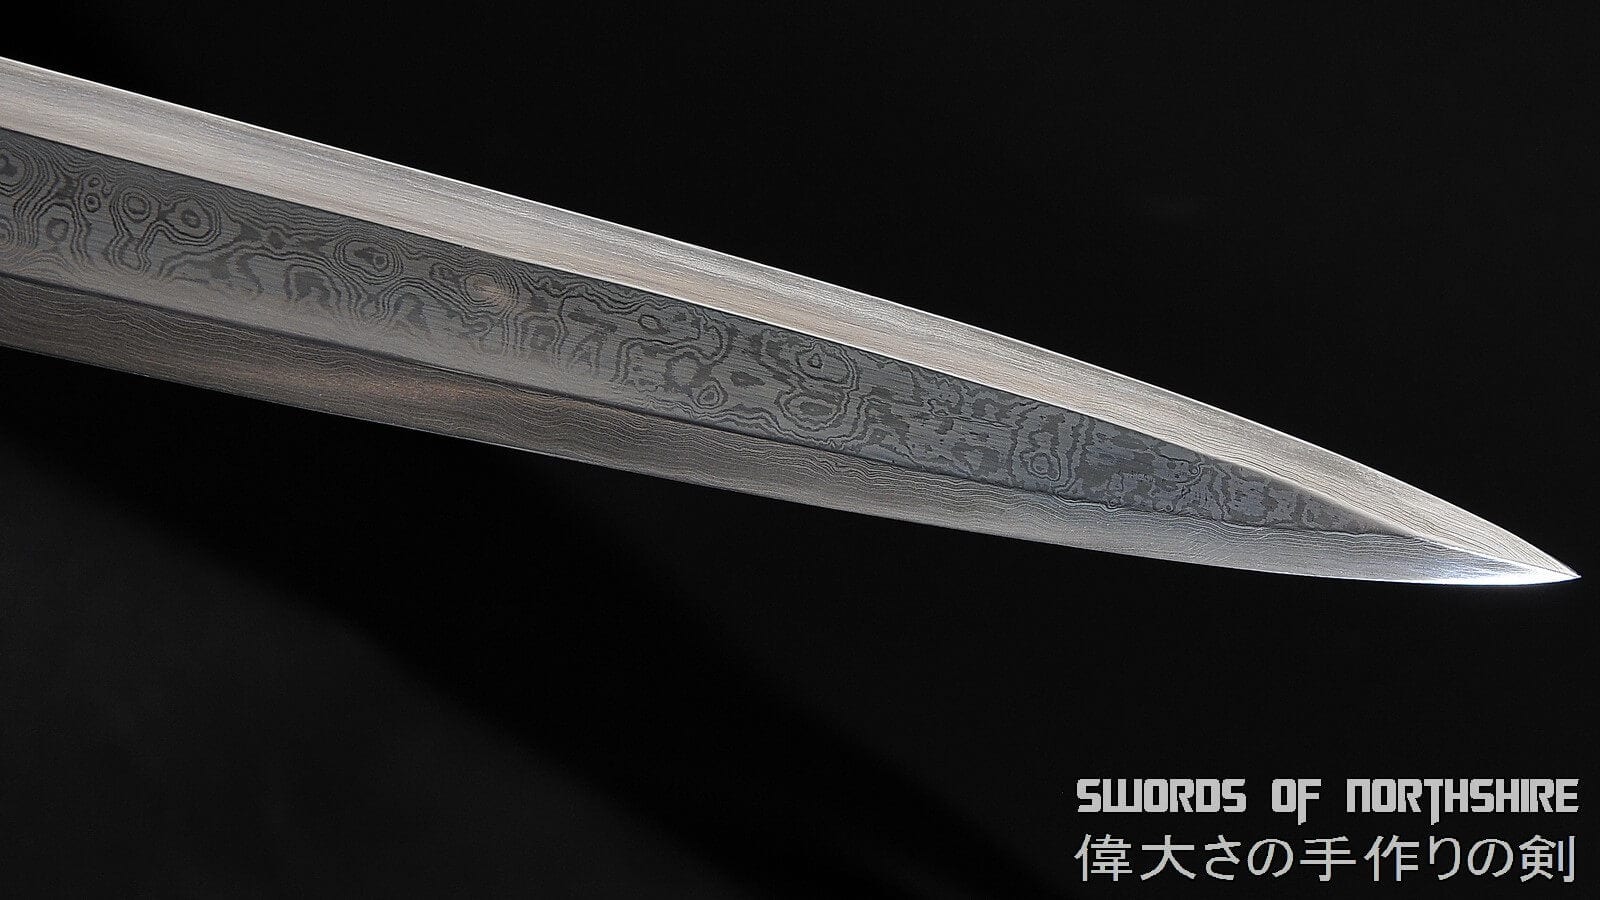 close-up of the silver blade, blade pattern, and tip of a European longsword on a black background